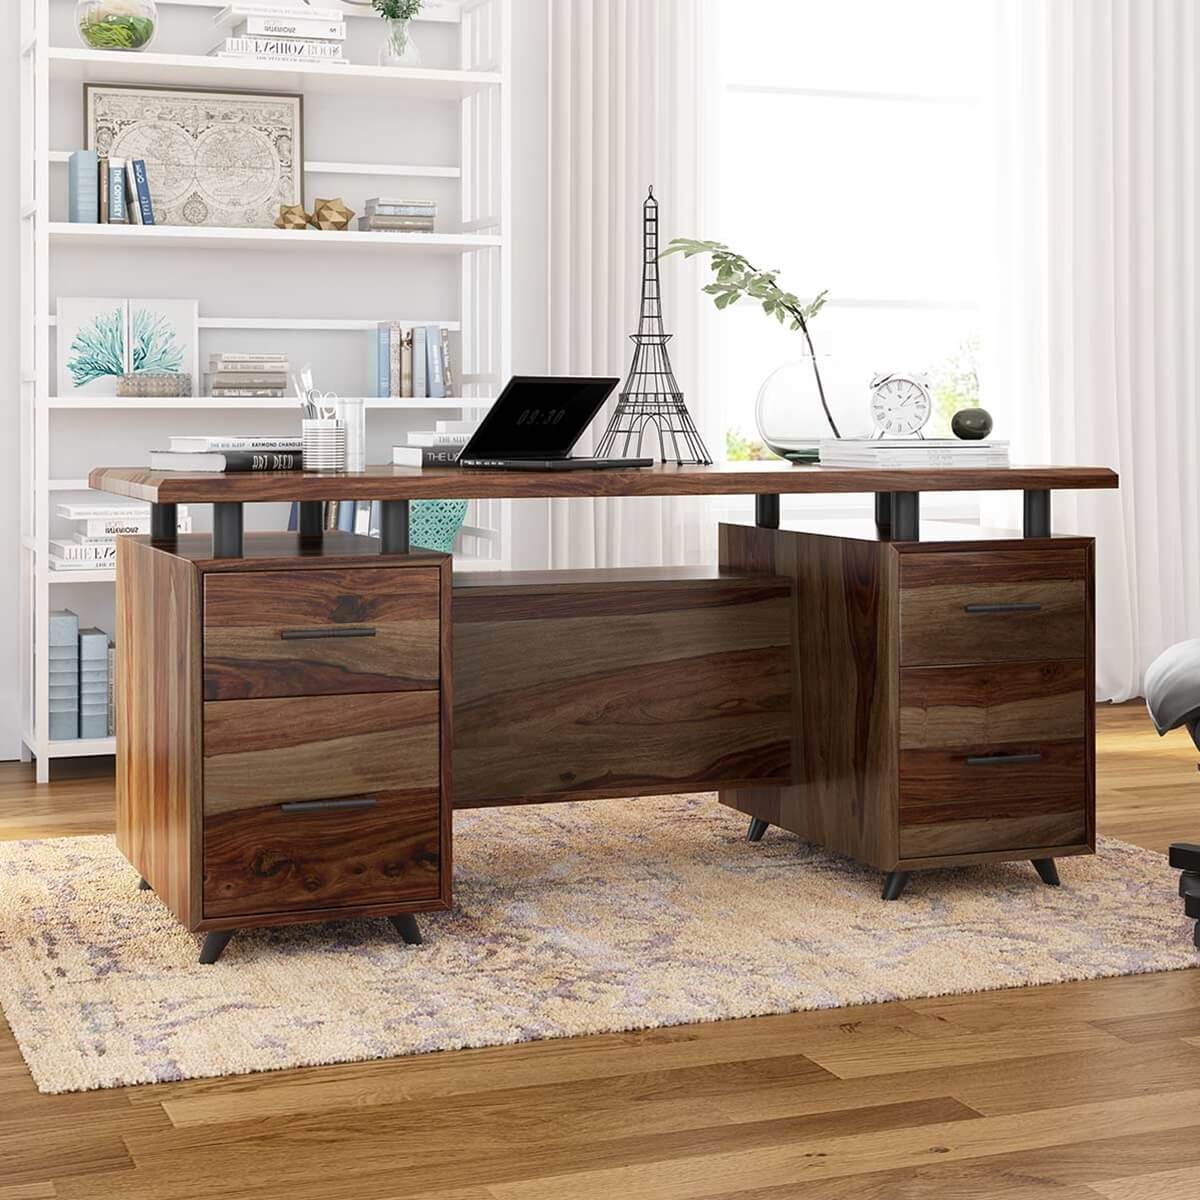 https://www.sierralivingconcepts.com/images/thumbs/0400075_hondah-solid-wood-70-inch-modern-dual-sided-storage-executive-desk.jpeg